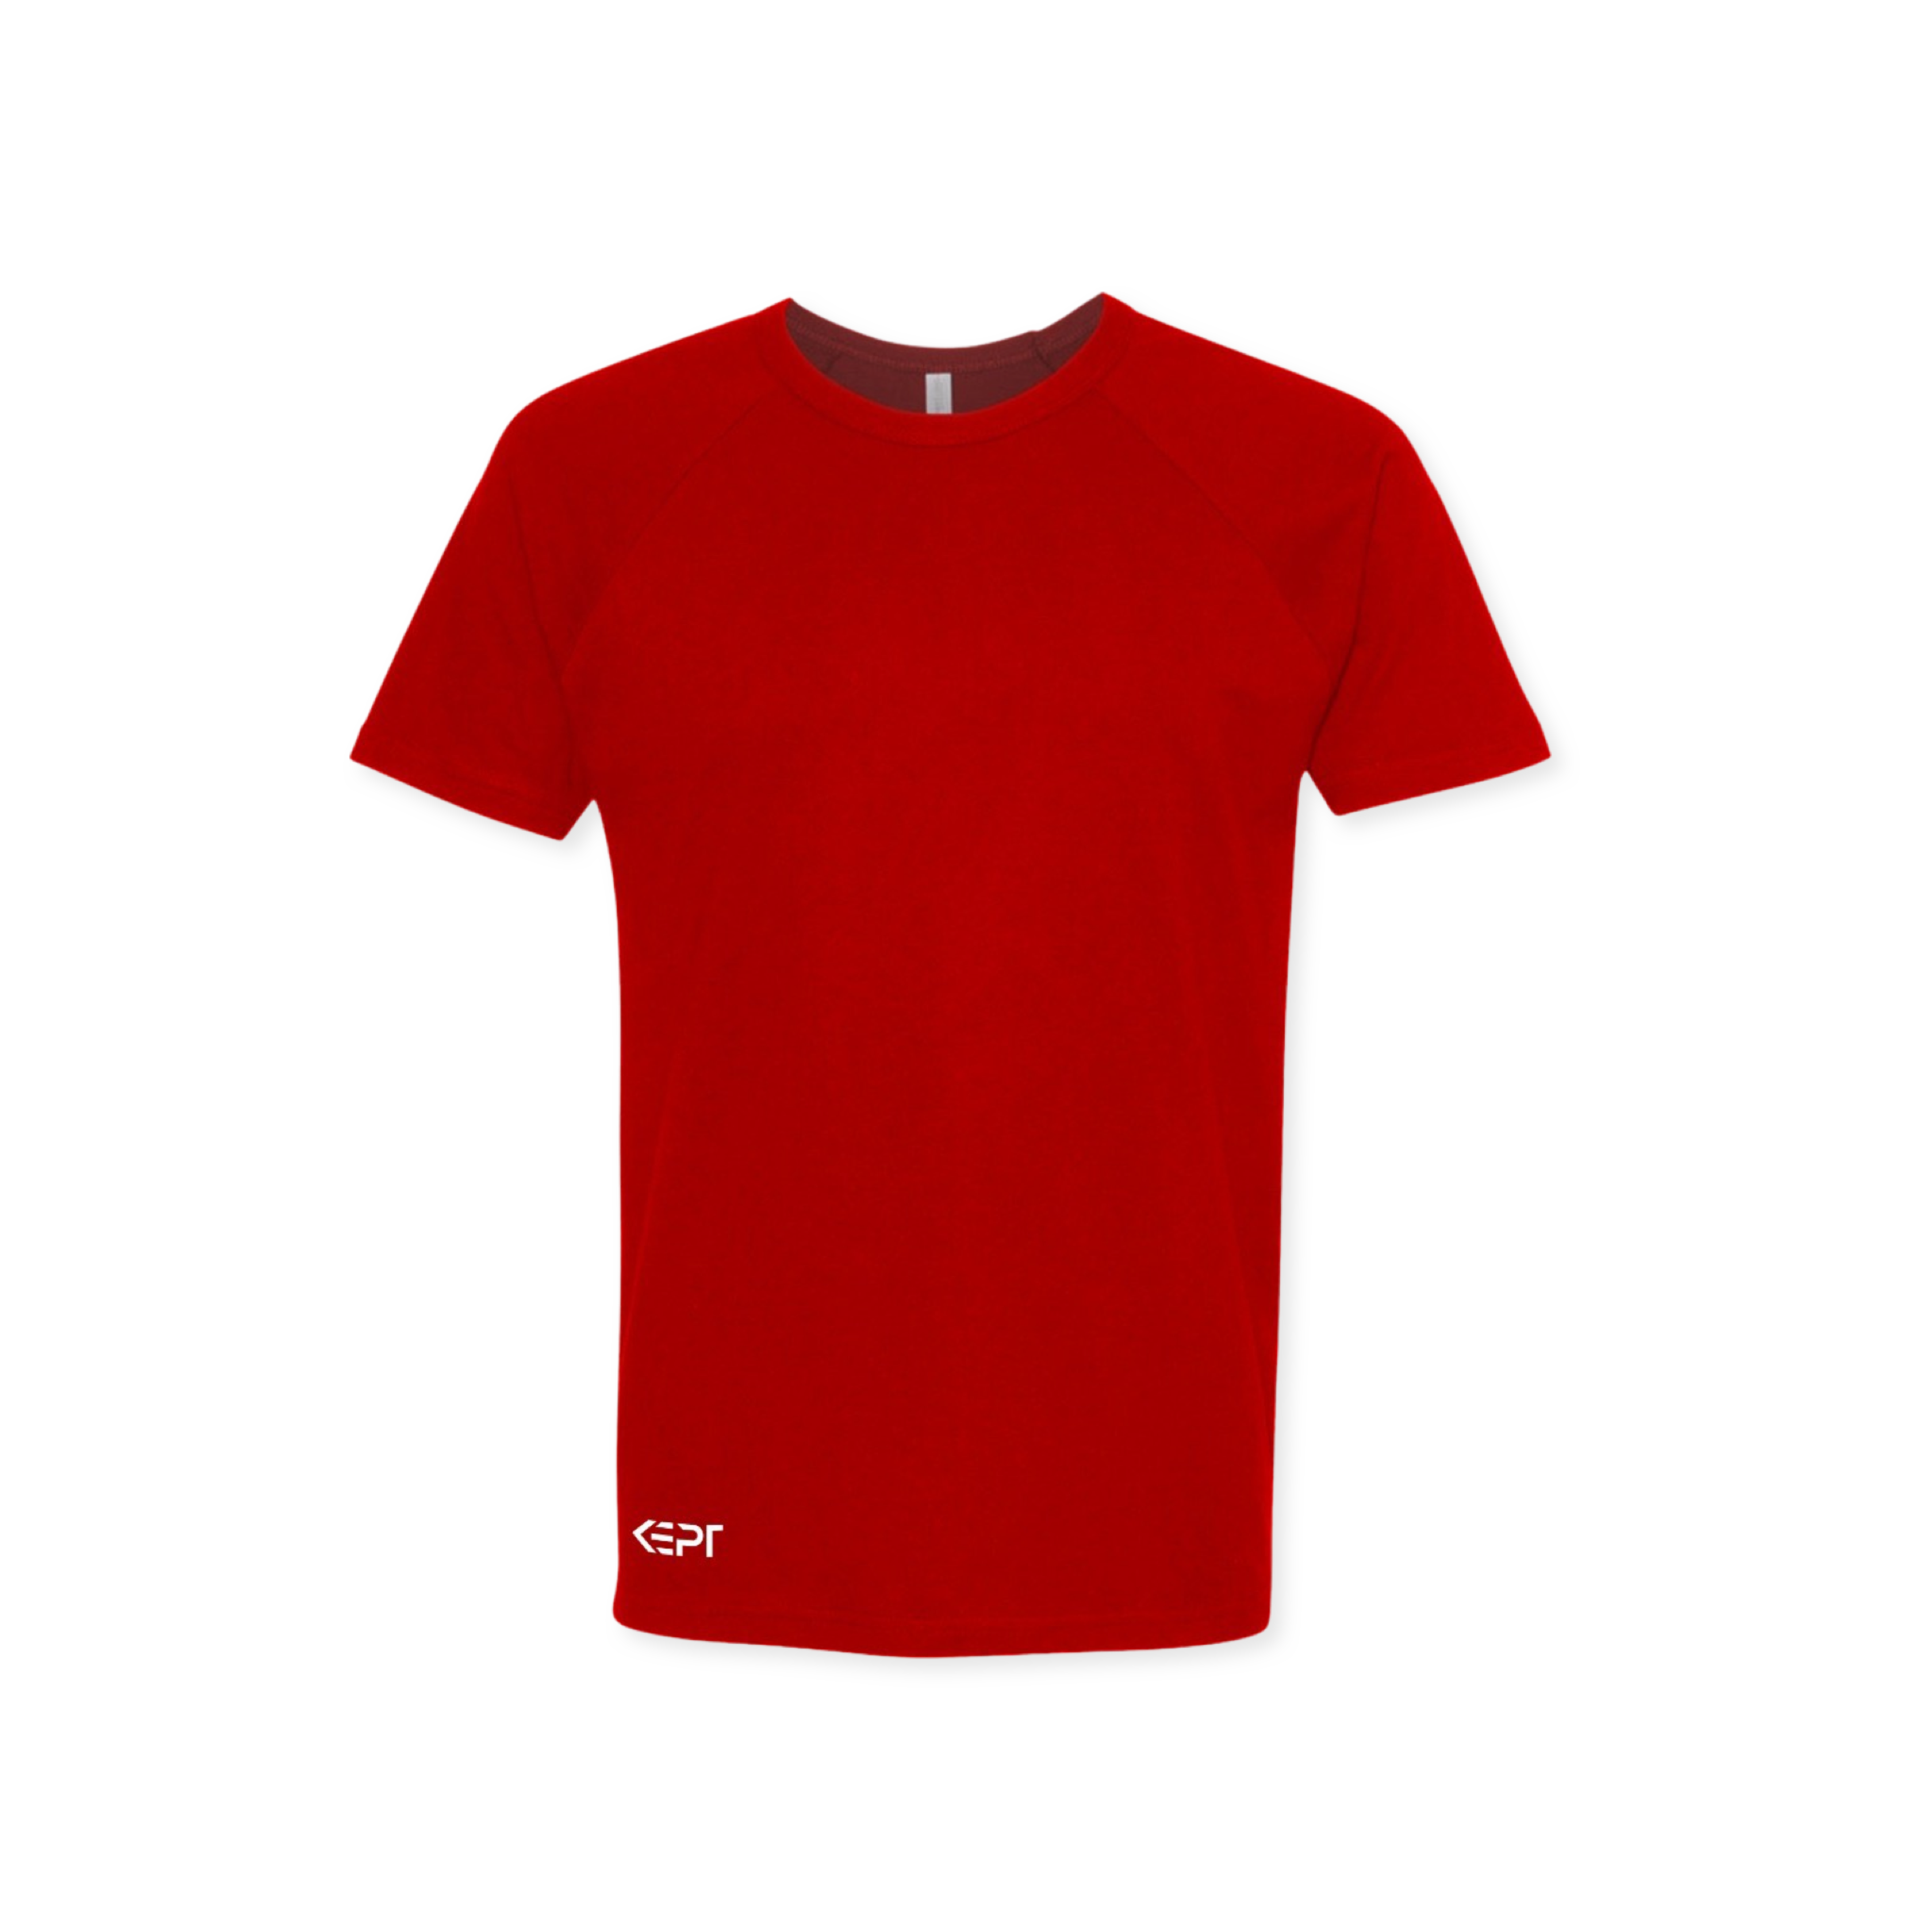 A red t-shirt made by KEPT.